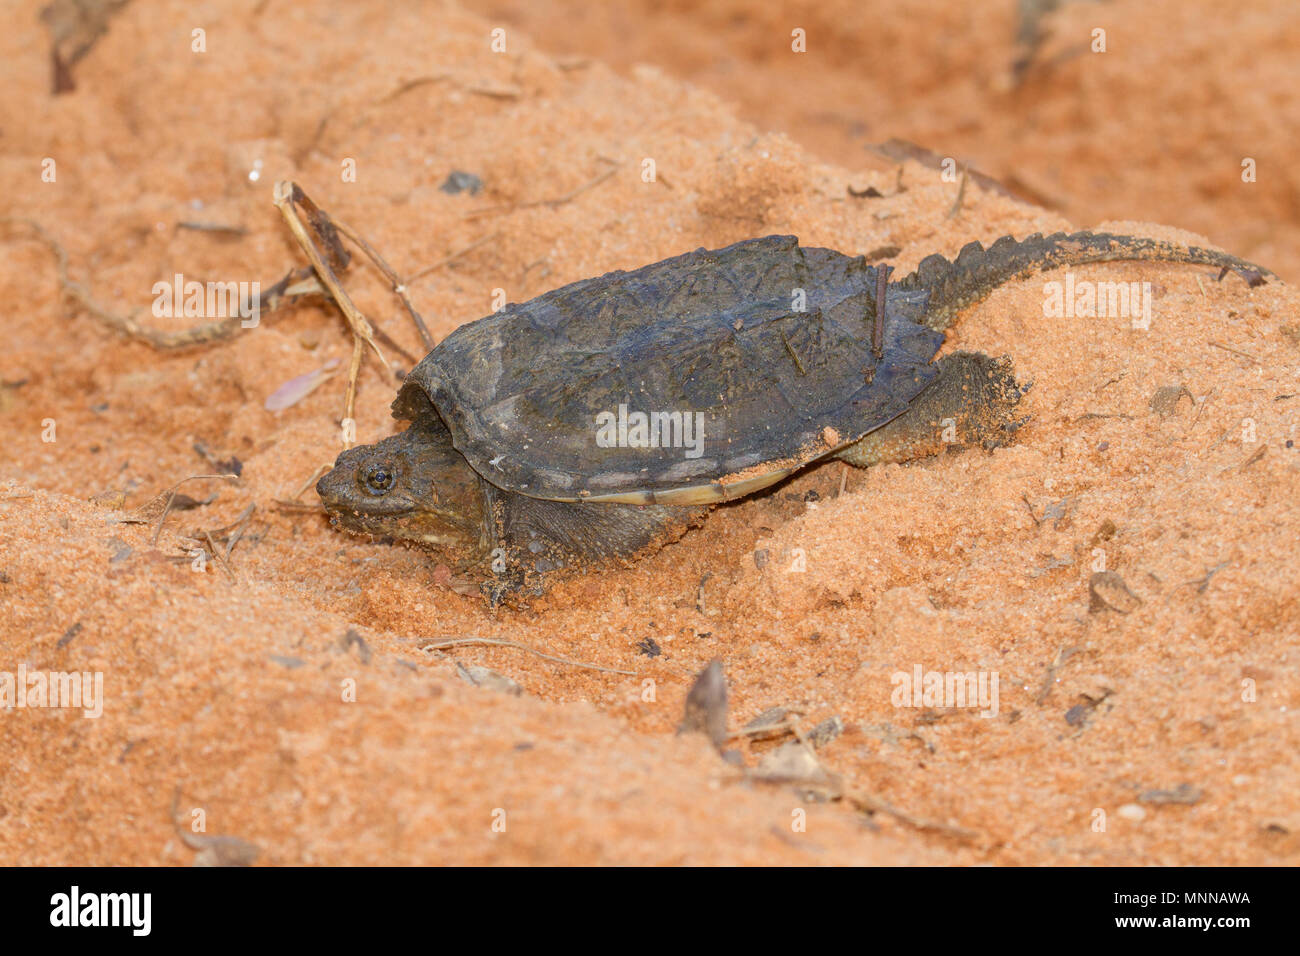 A young snapping turtle crossing a sandy road. Stock Photo